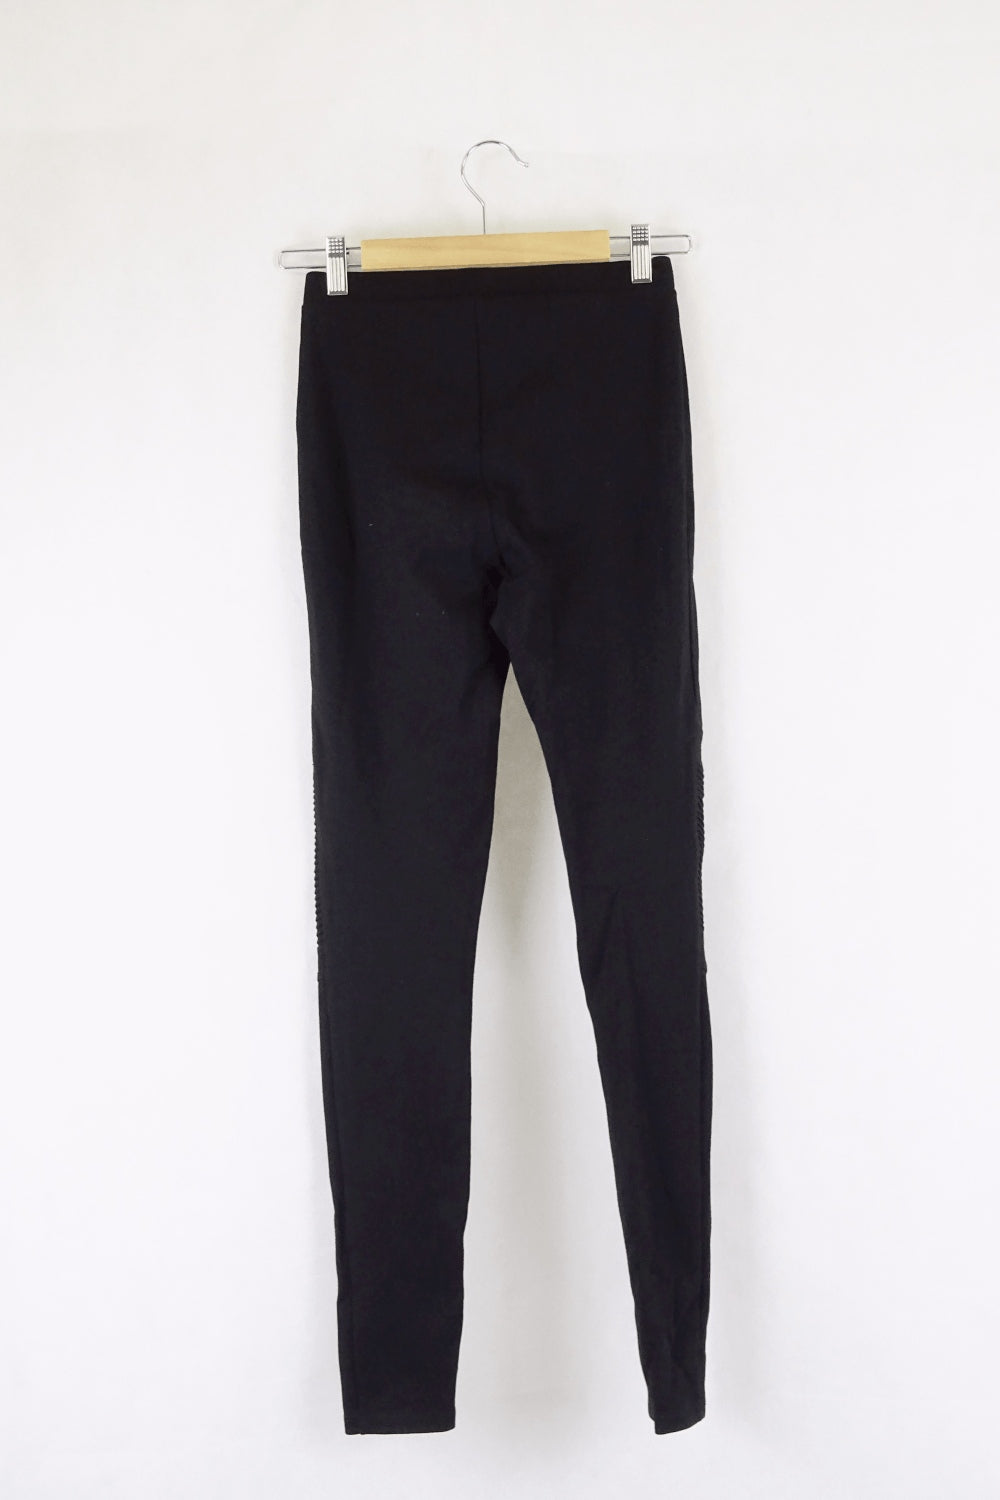 French Connection Black Leggings 6